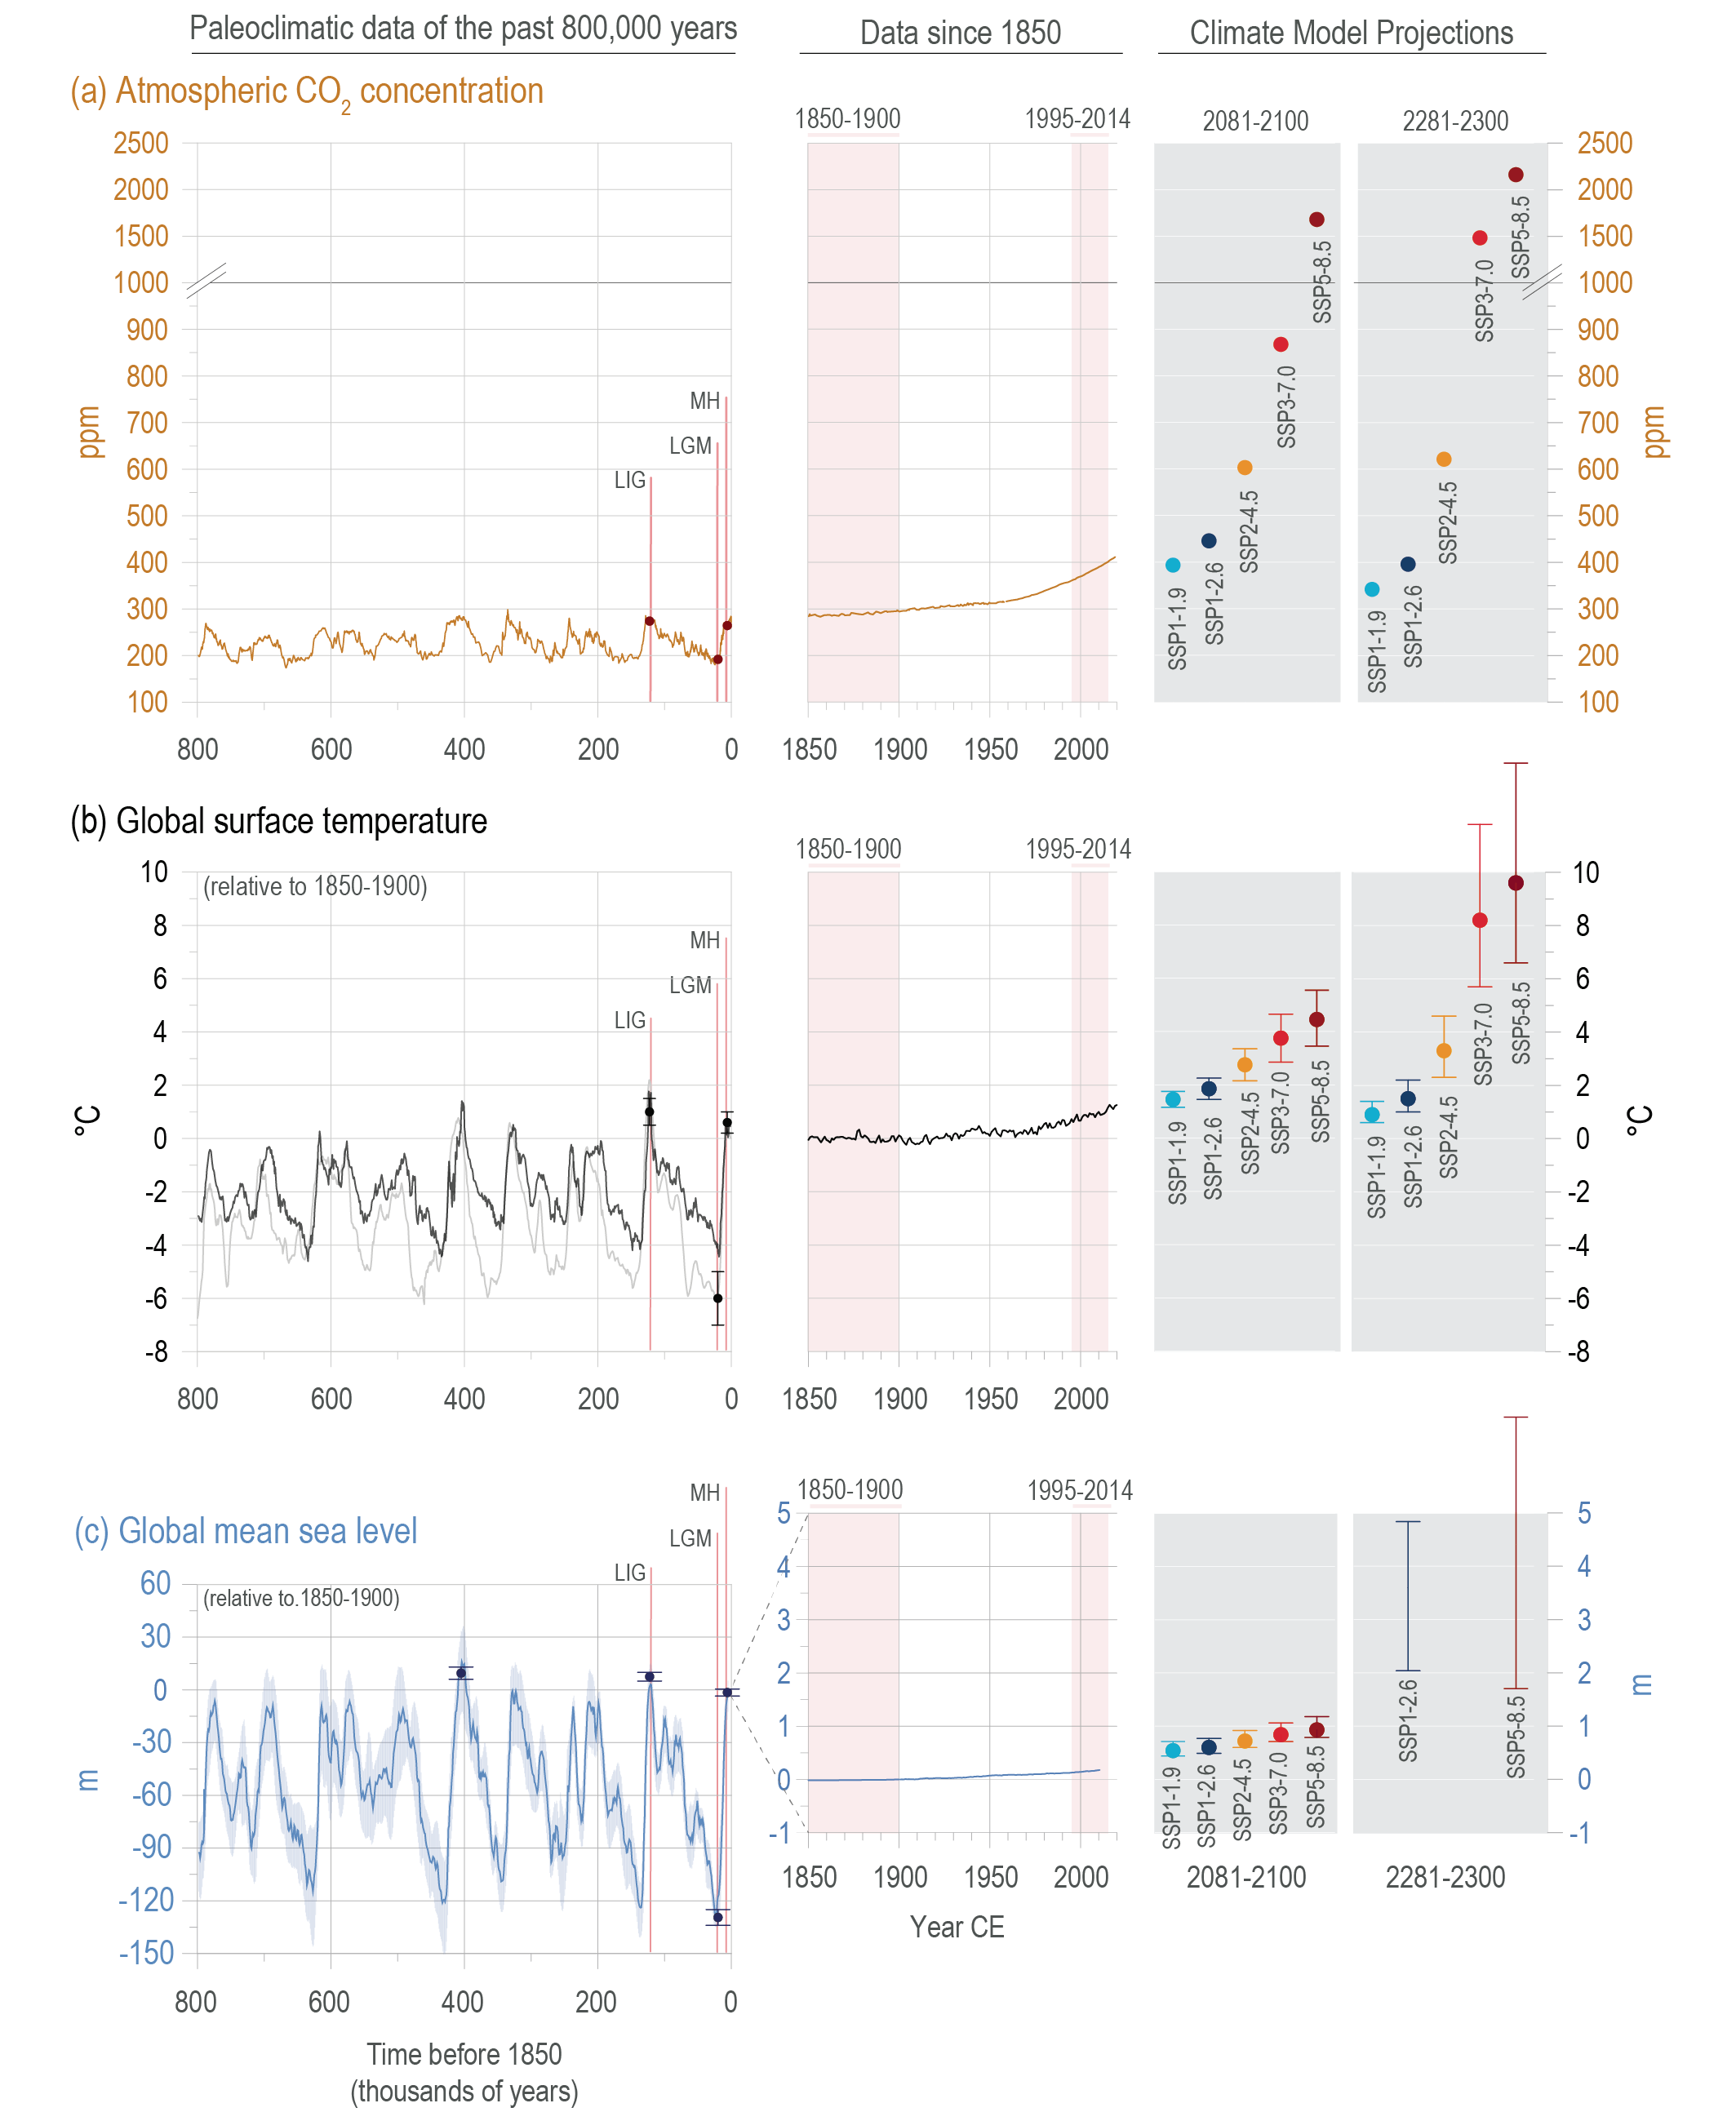 Figure 1.5 | Long-term context of anthropogenic climate changebased on selected paleoclimatic reconstructions over the past 800,000 years (800 kyr) for three key indicators: atmospheric CO2concentrations, global mean surface temperature (GMST), and global mean sea level (GMSL).